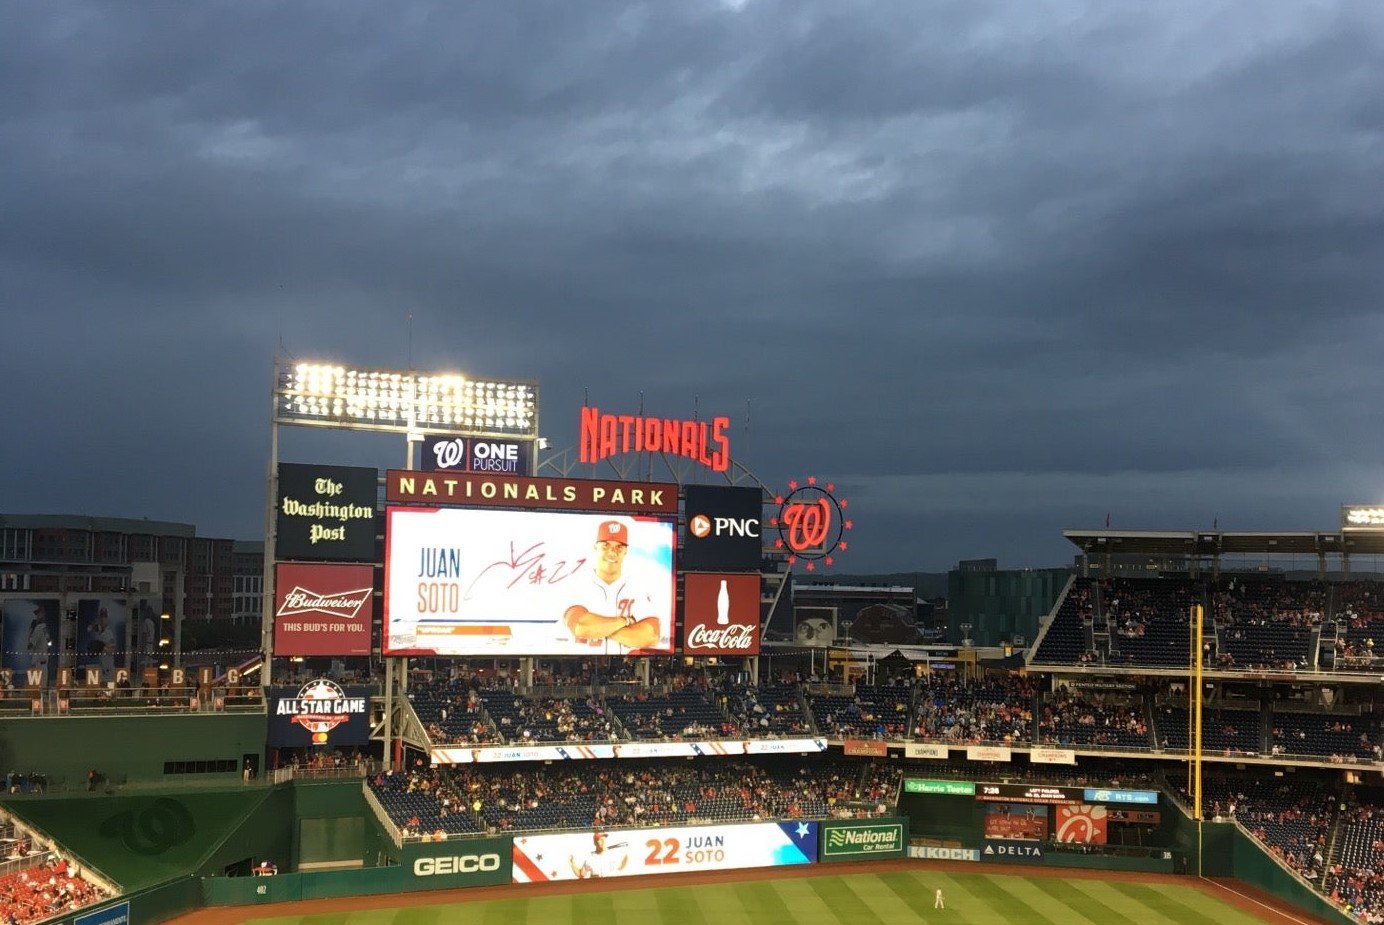 rain coming in at nationals park